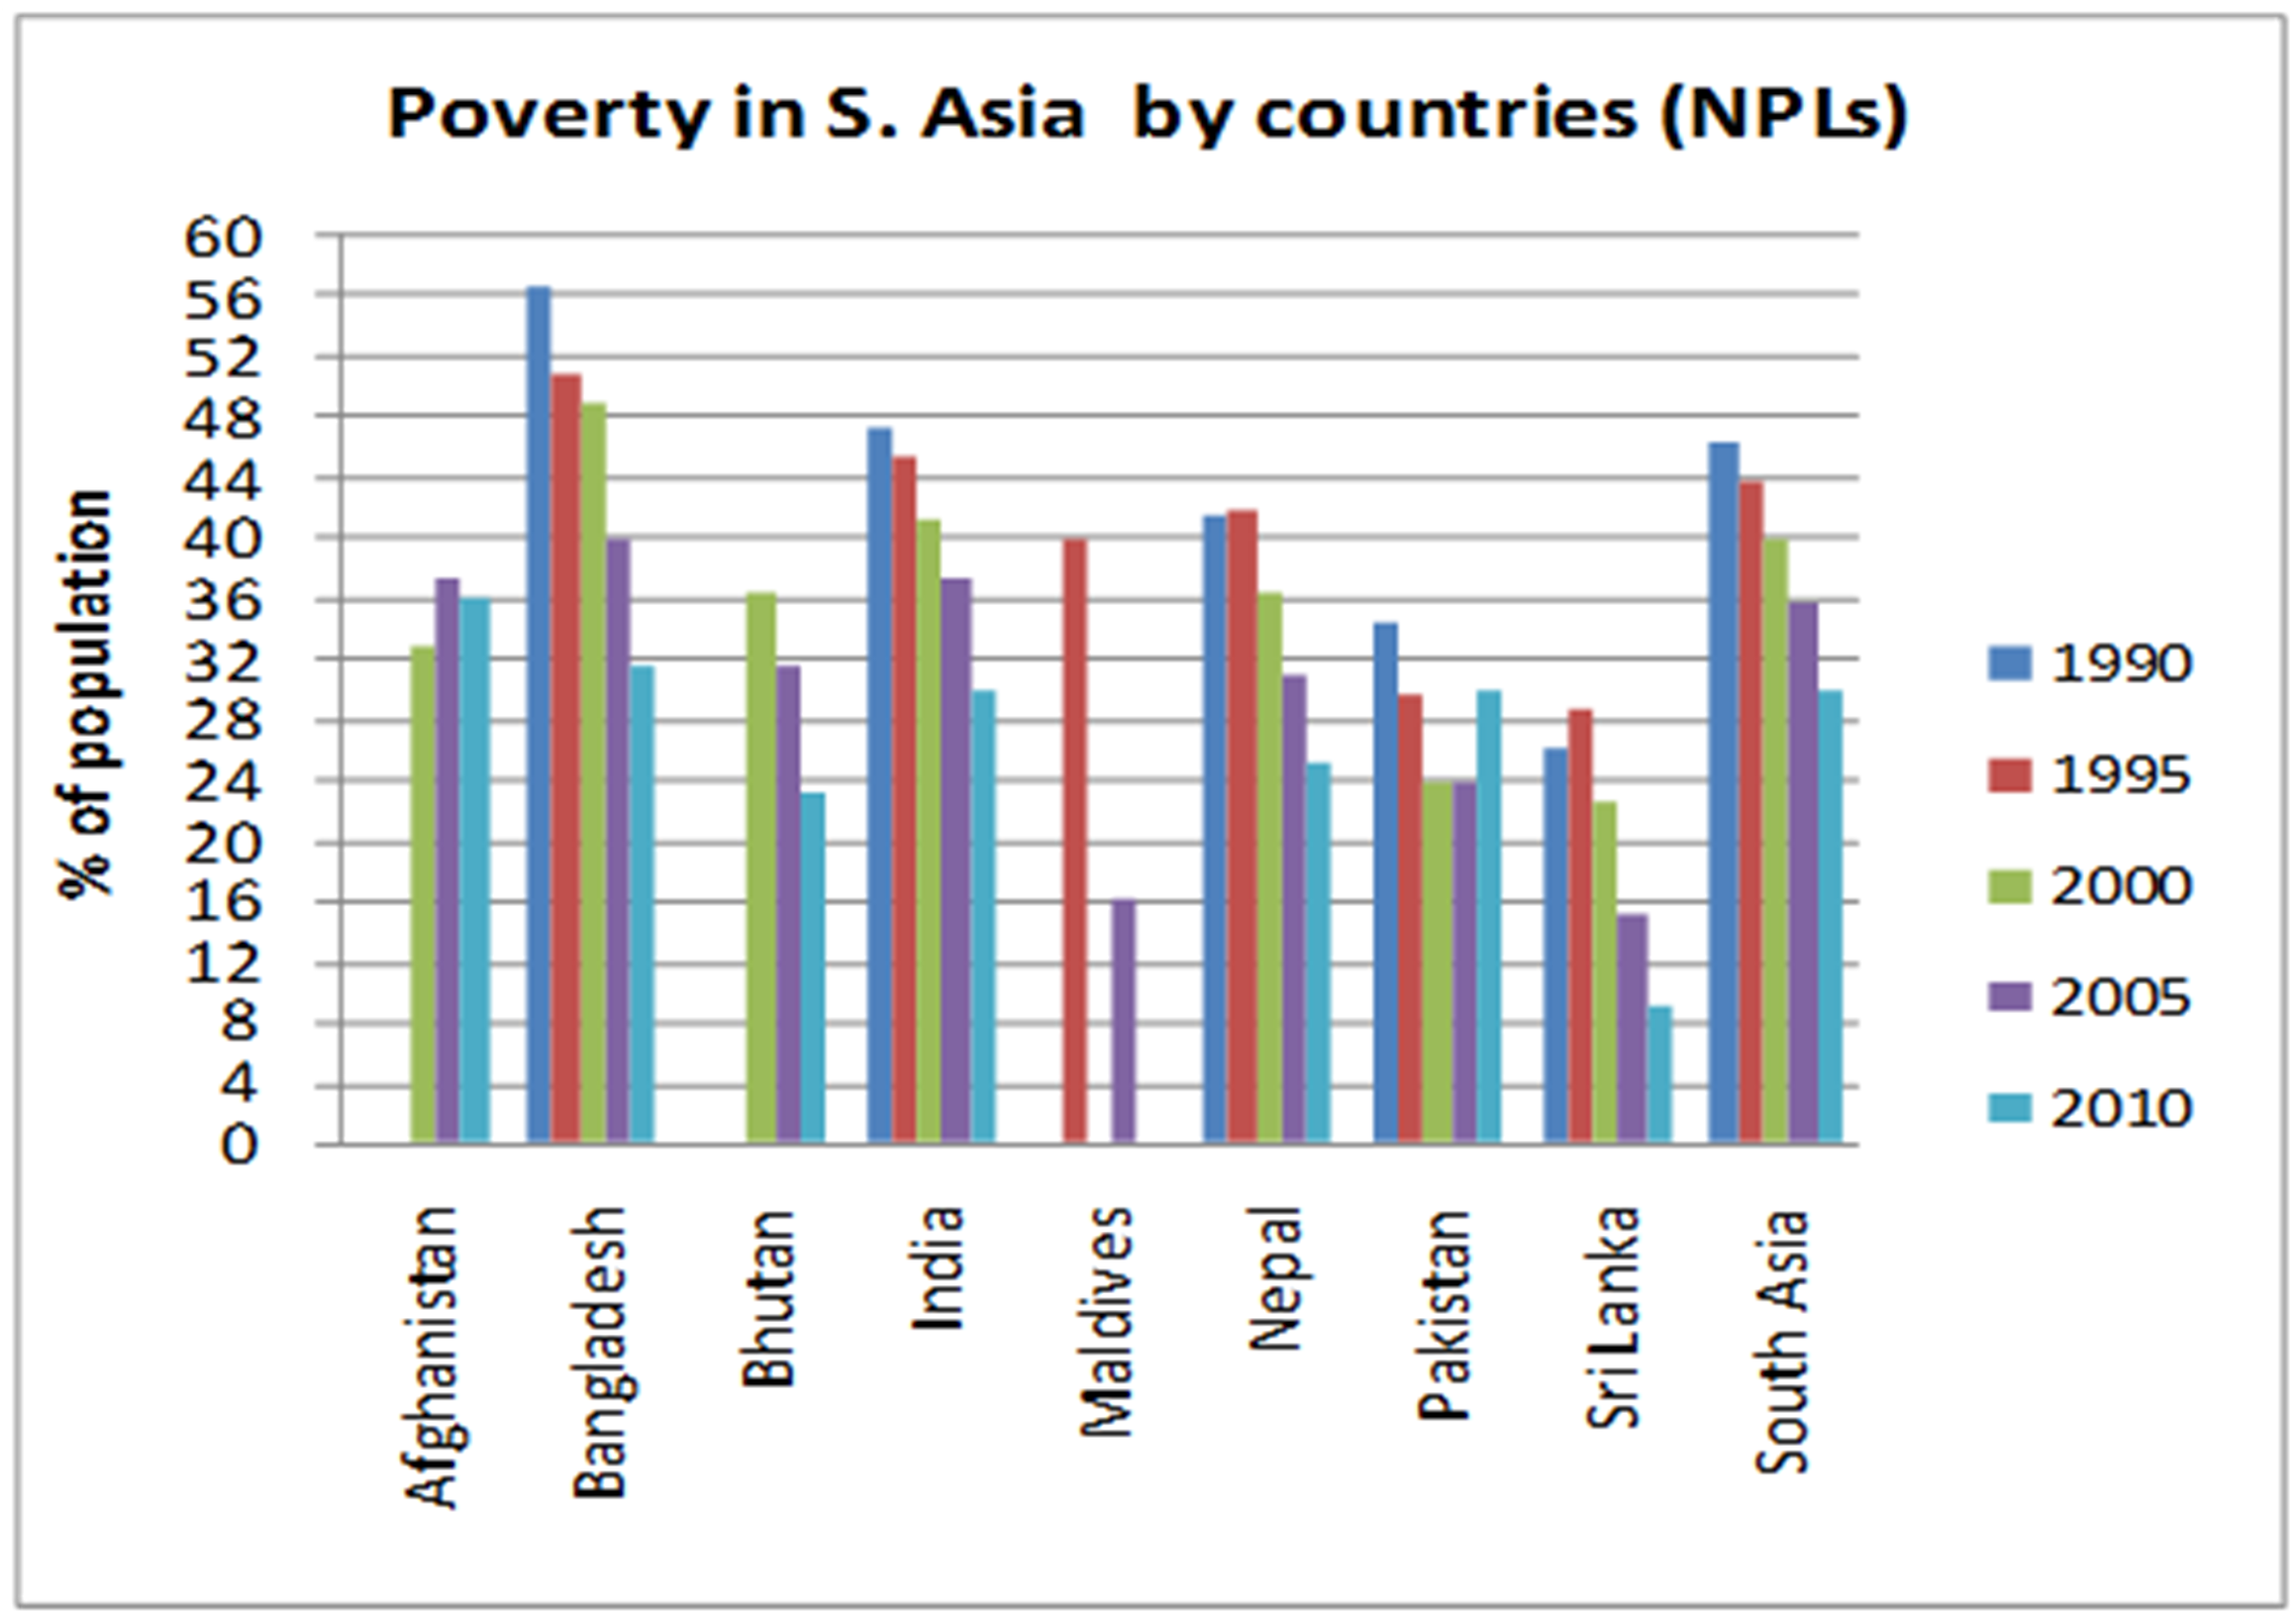 Figure 1(b): Trends in Incidence of Poverty by Country in SAARC Region